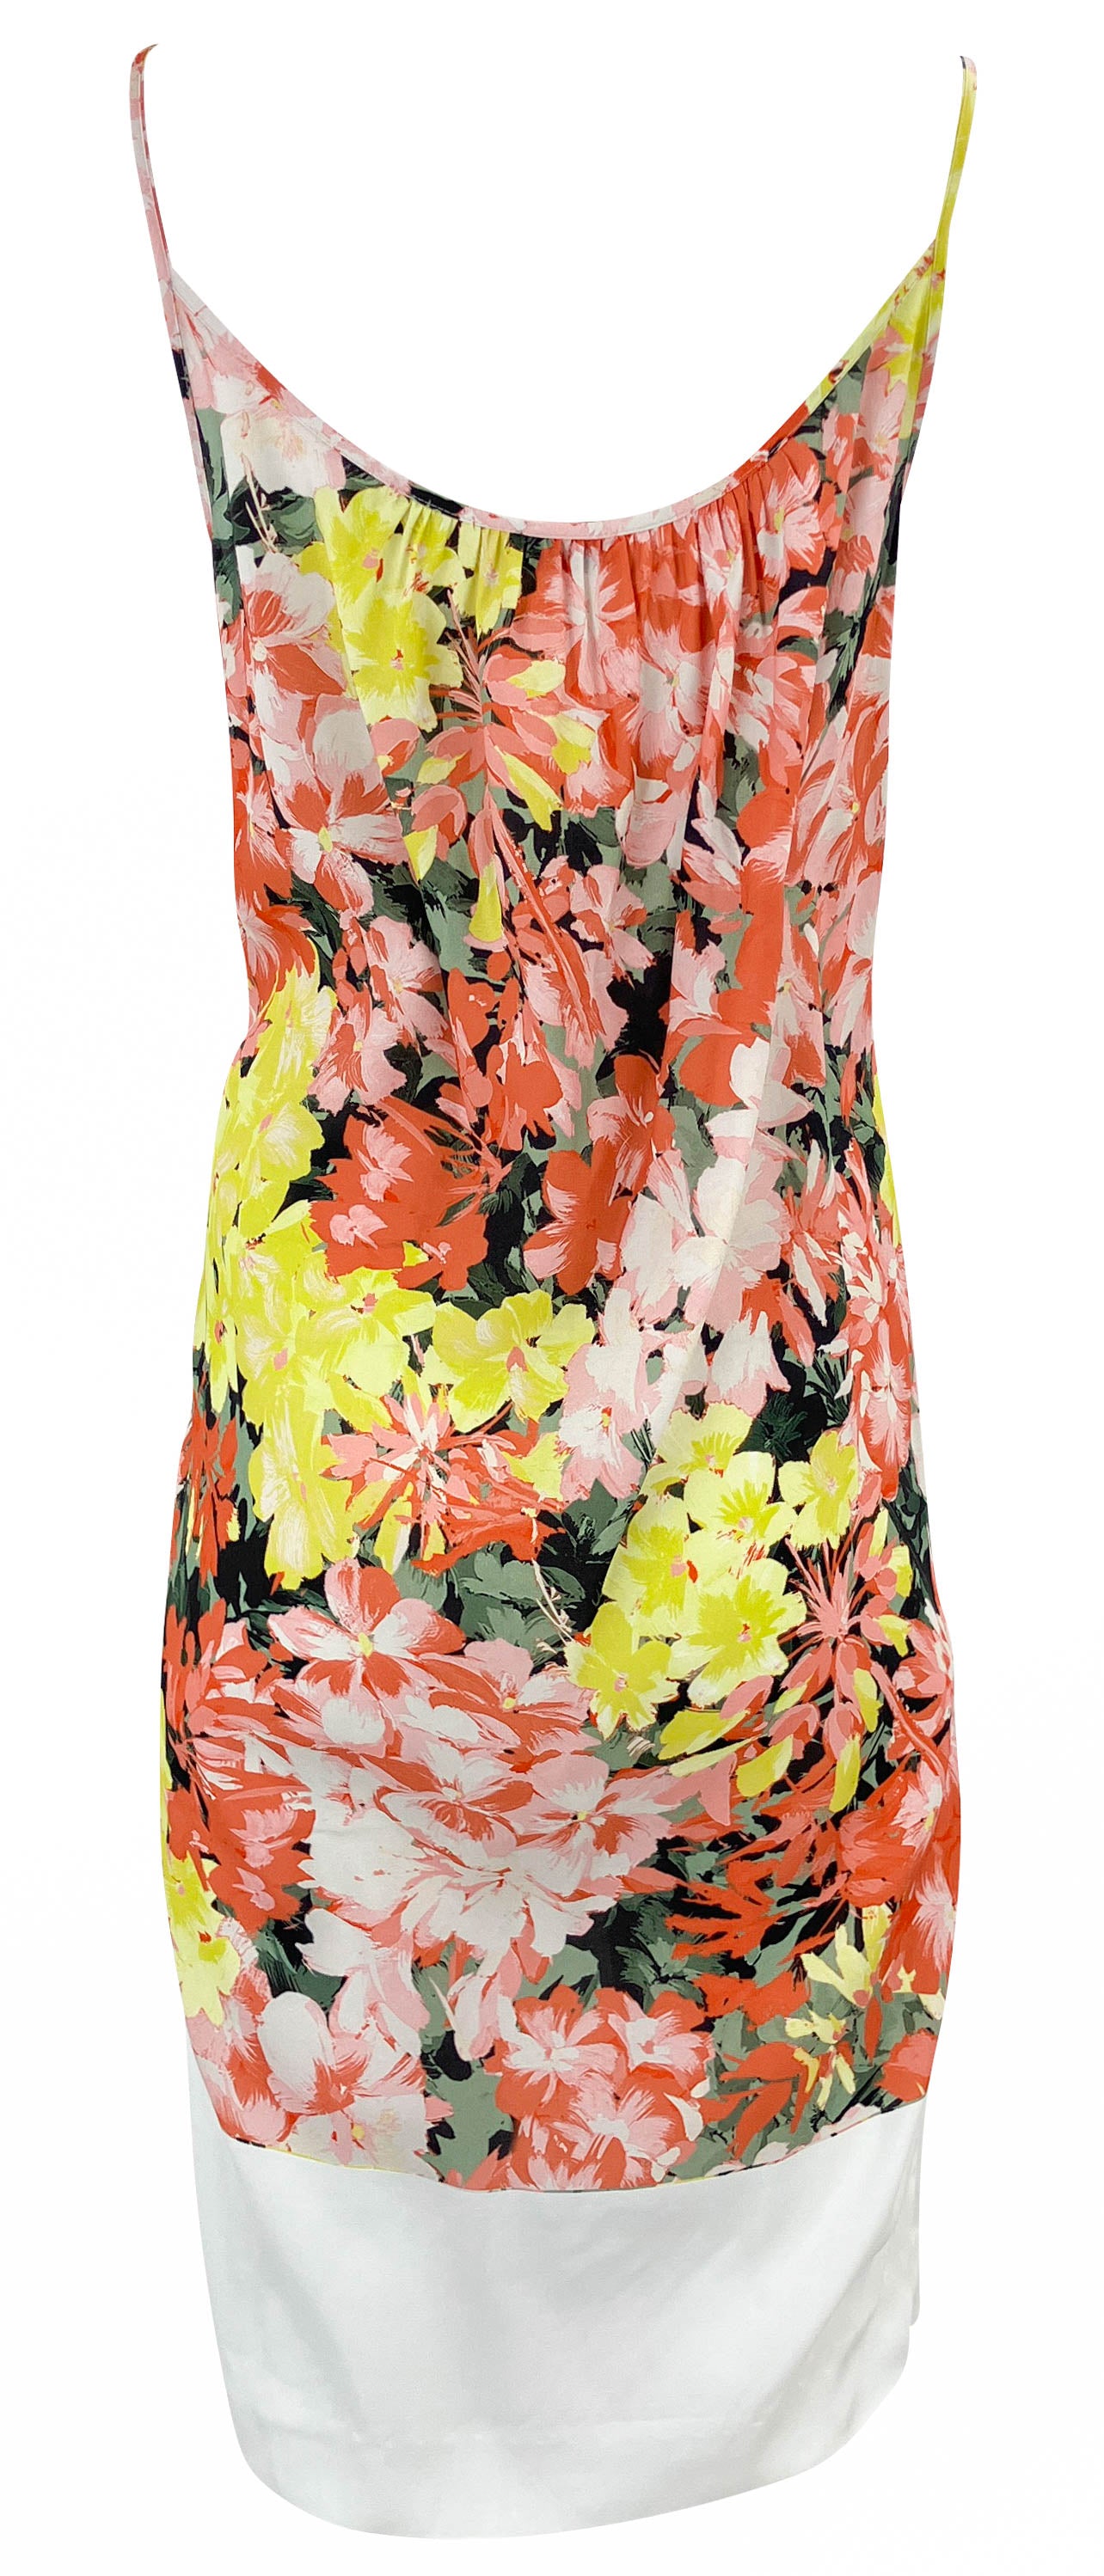 Dries Van Noten Floral Midi Dress in Pink and Yellow Floral - Discounts on Dries Van Noten at UAL